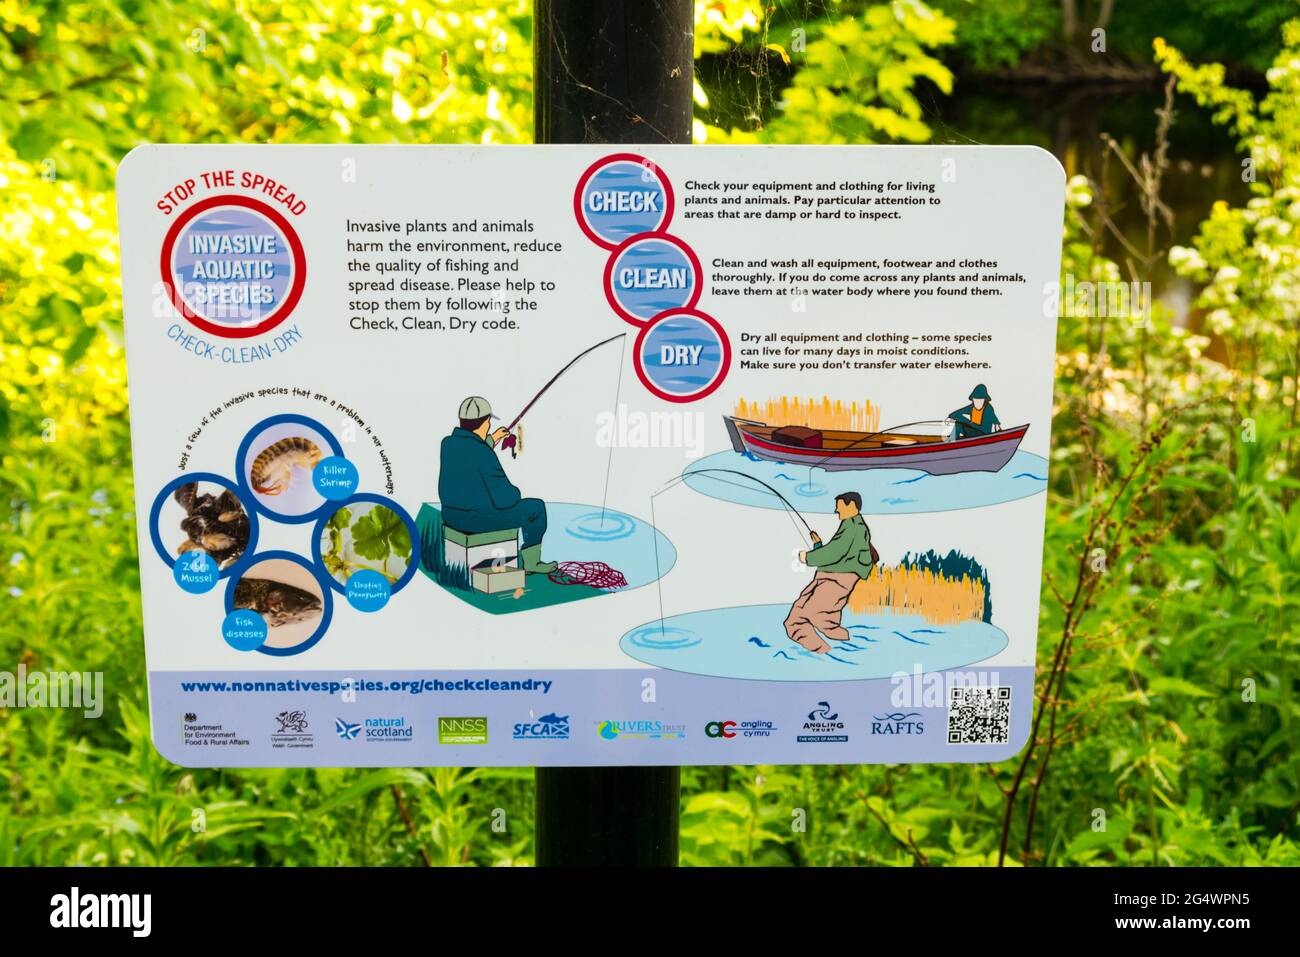 Invasive Aquatic Species Warning Sign for Anglers Stock Photo